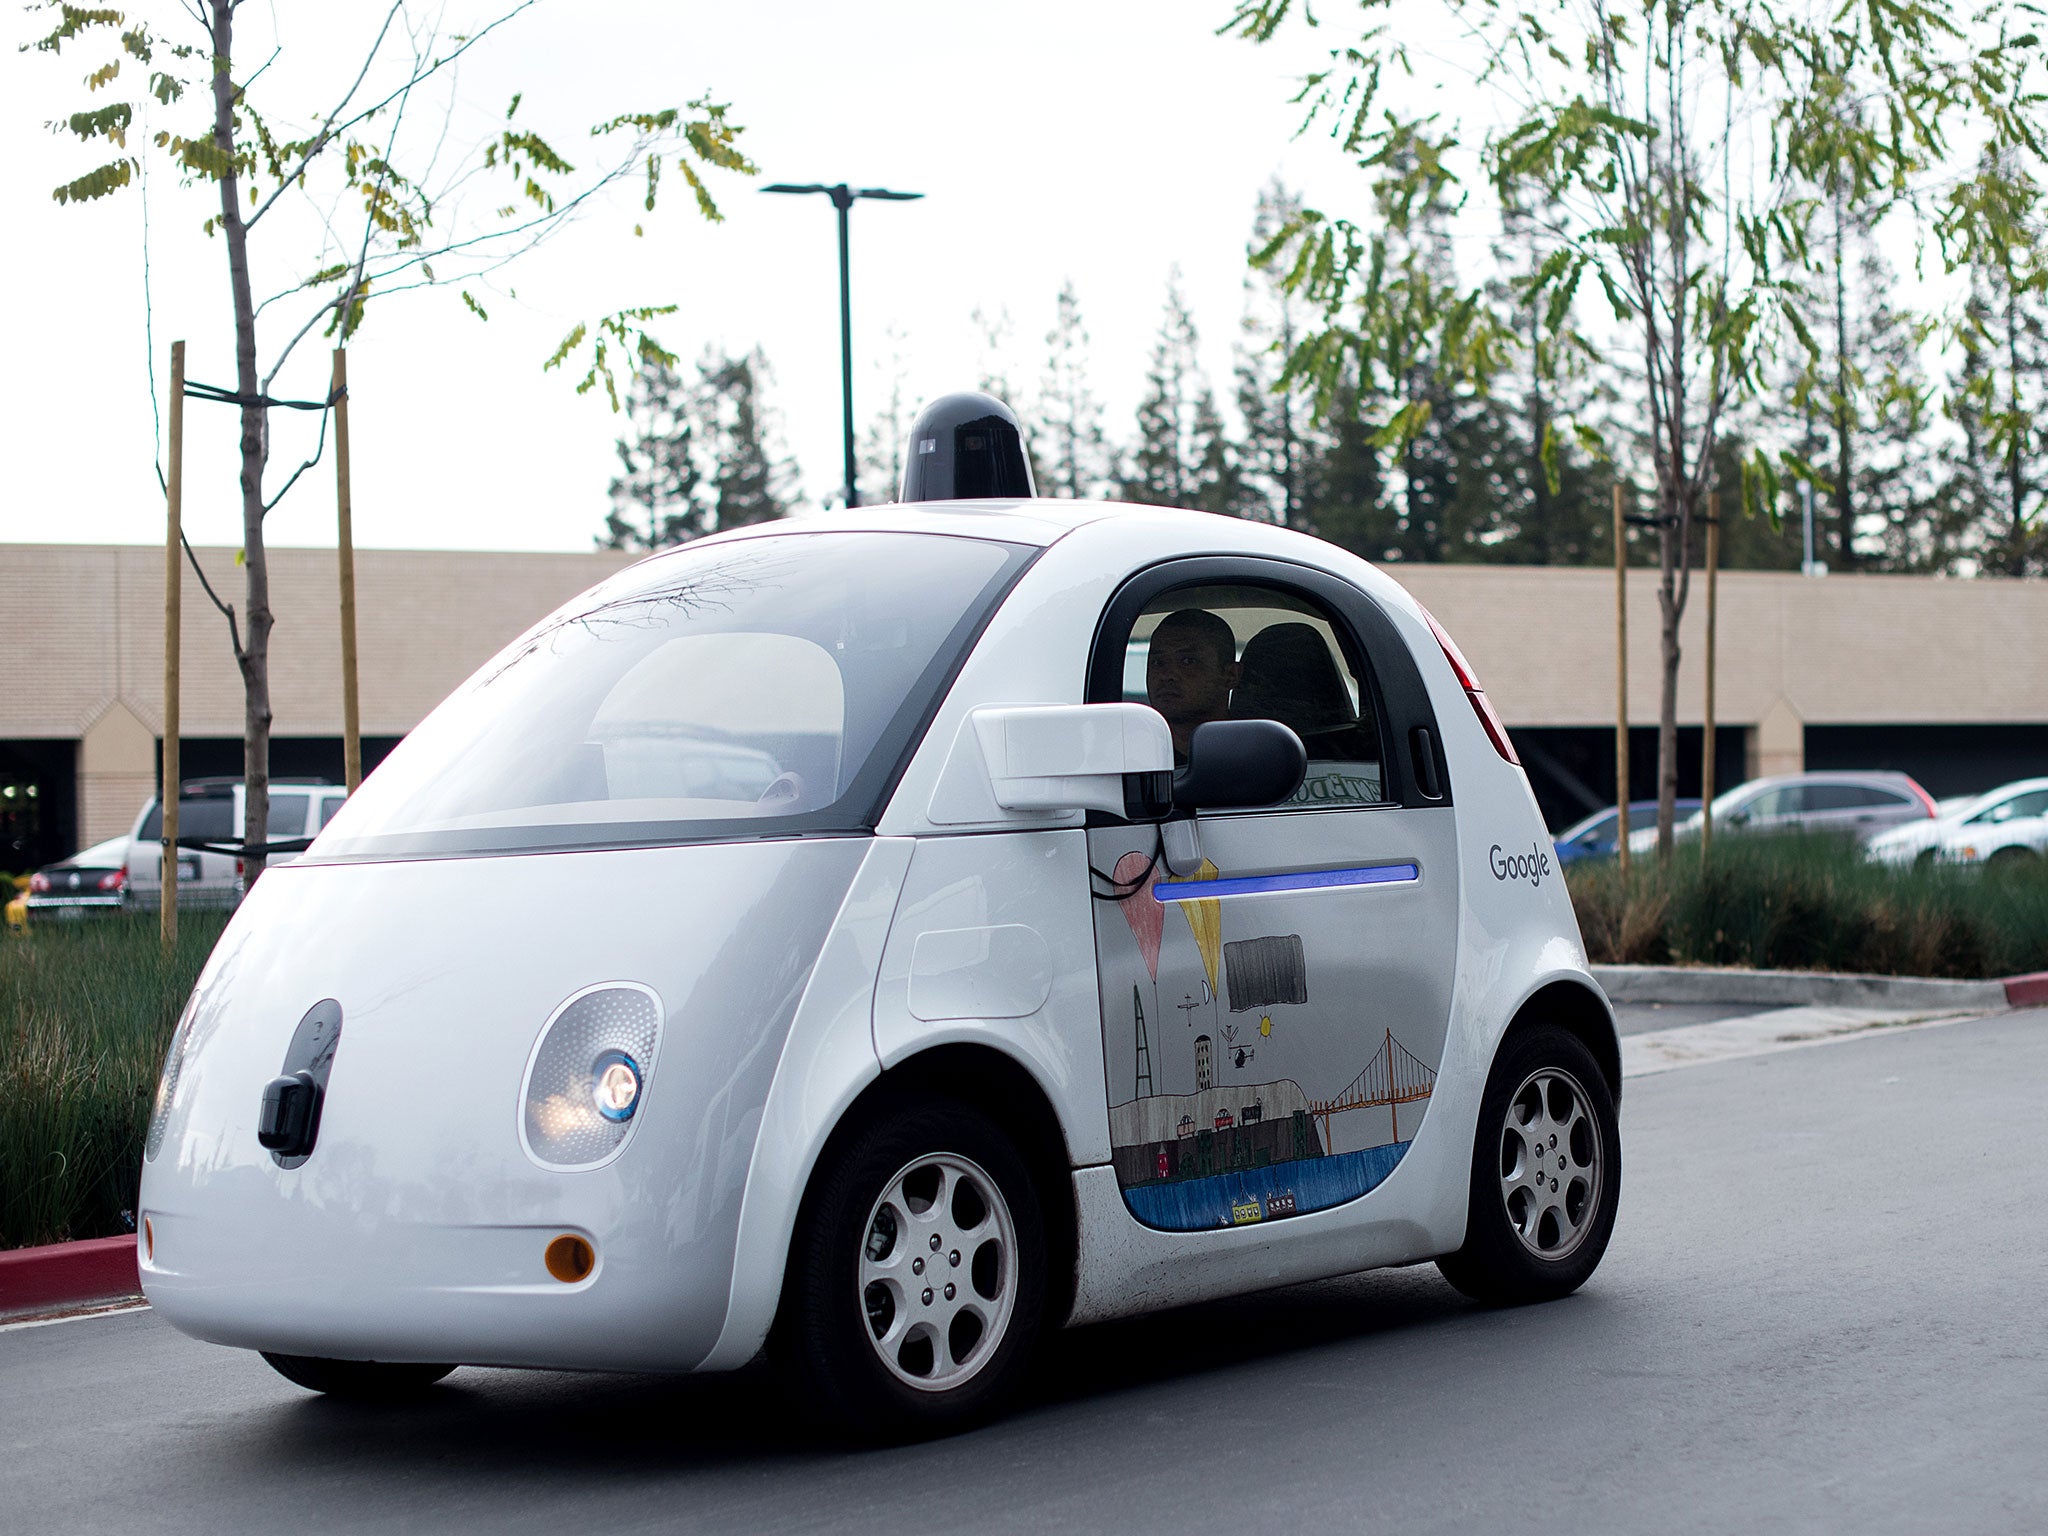 A self-driving car traverses a parking lot at Google's headquarters in Mountain View, California